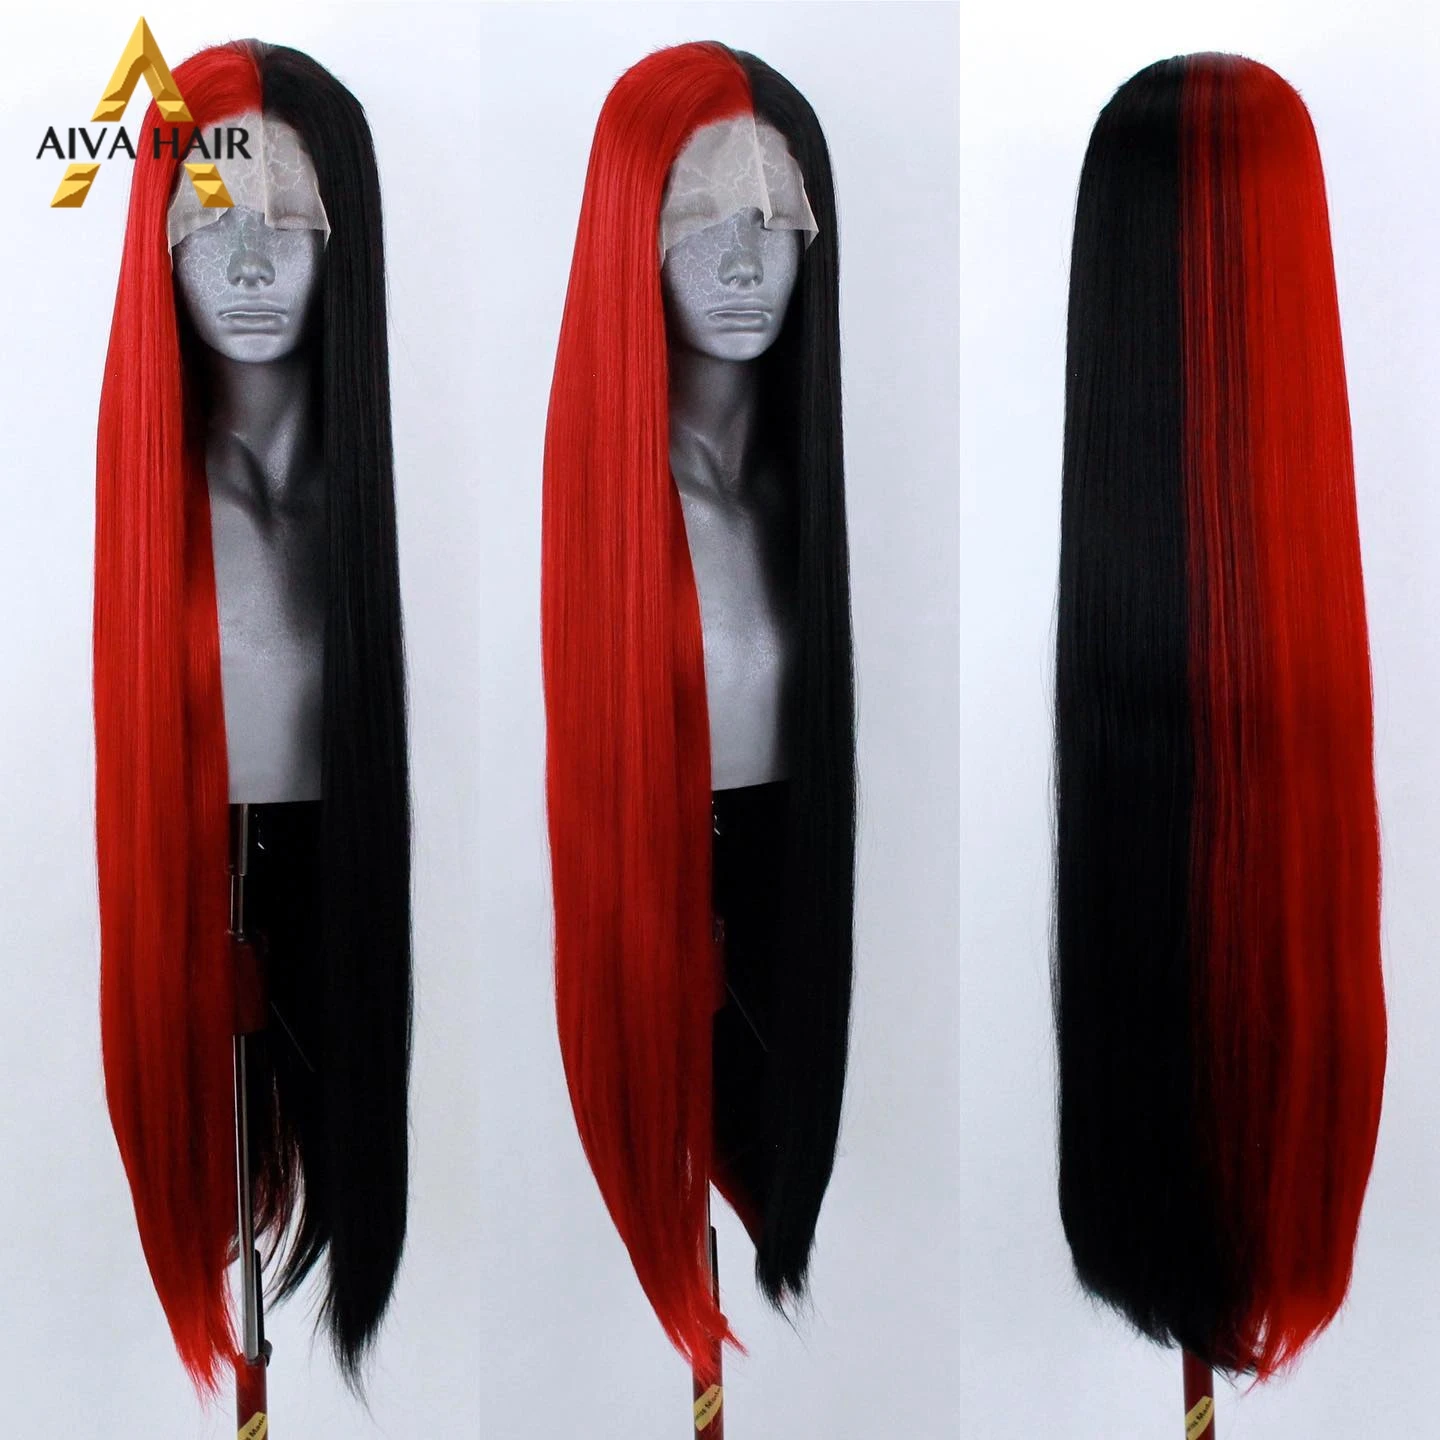 

30 Inch Long Aiva Red Black Synthetic Lace Front Wig Heat Resistant Drag Quees 180 Density Ombre Pink Cosplay Wigs For Women